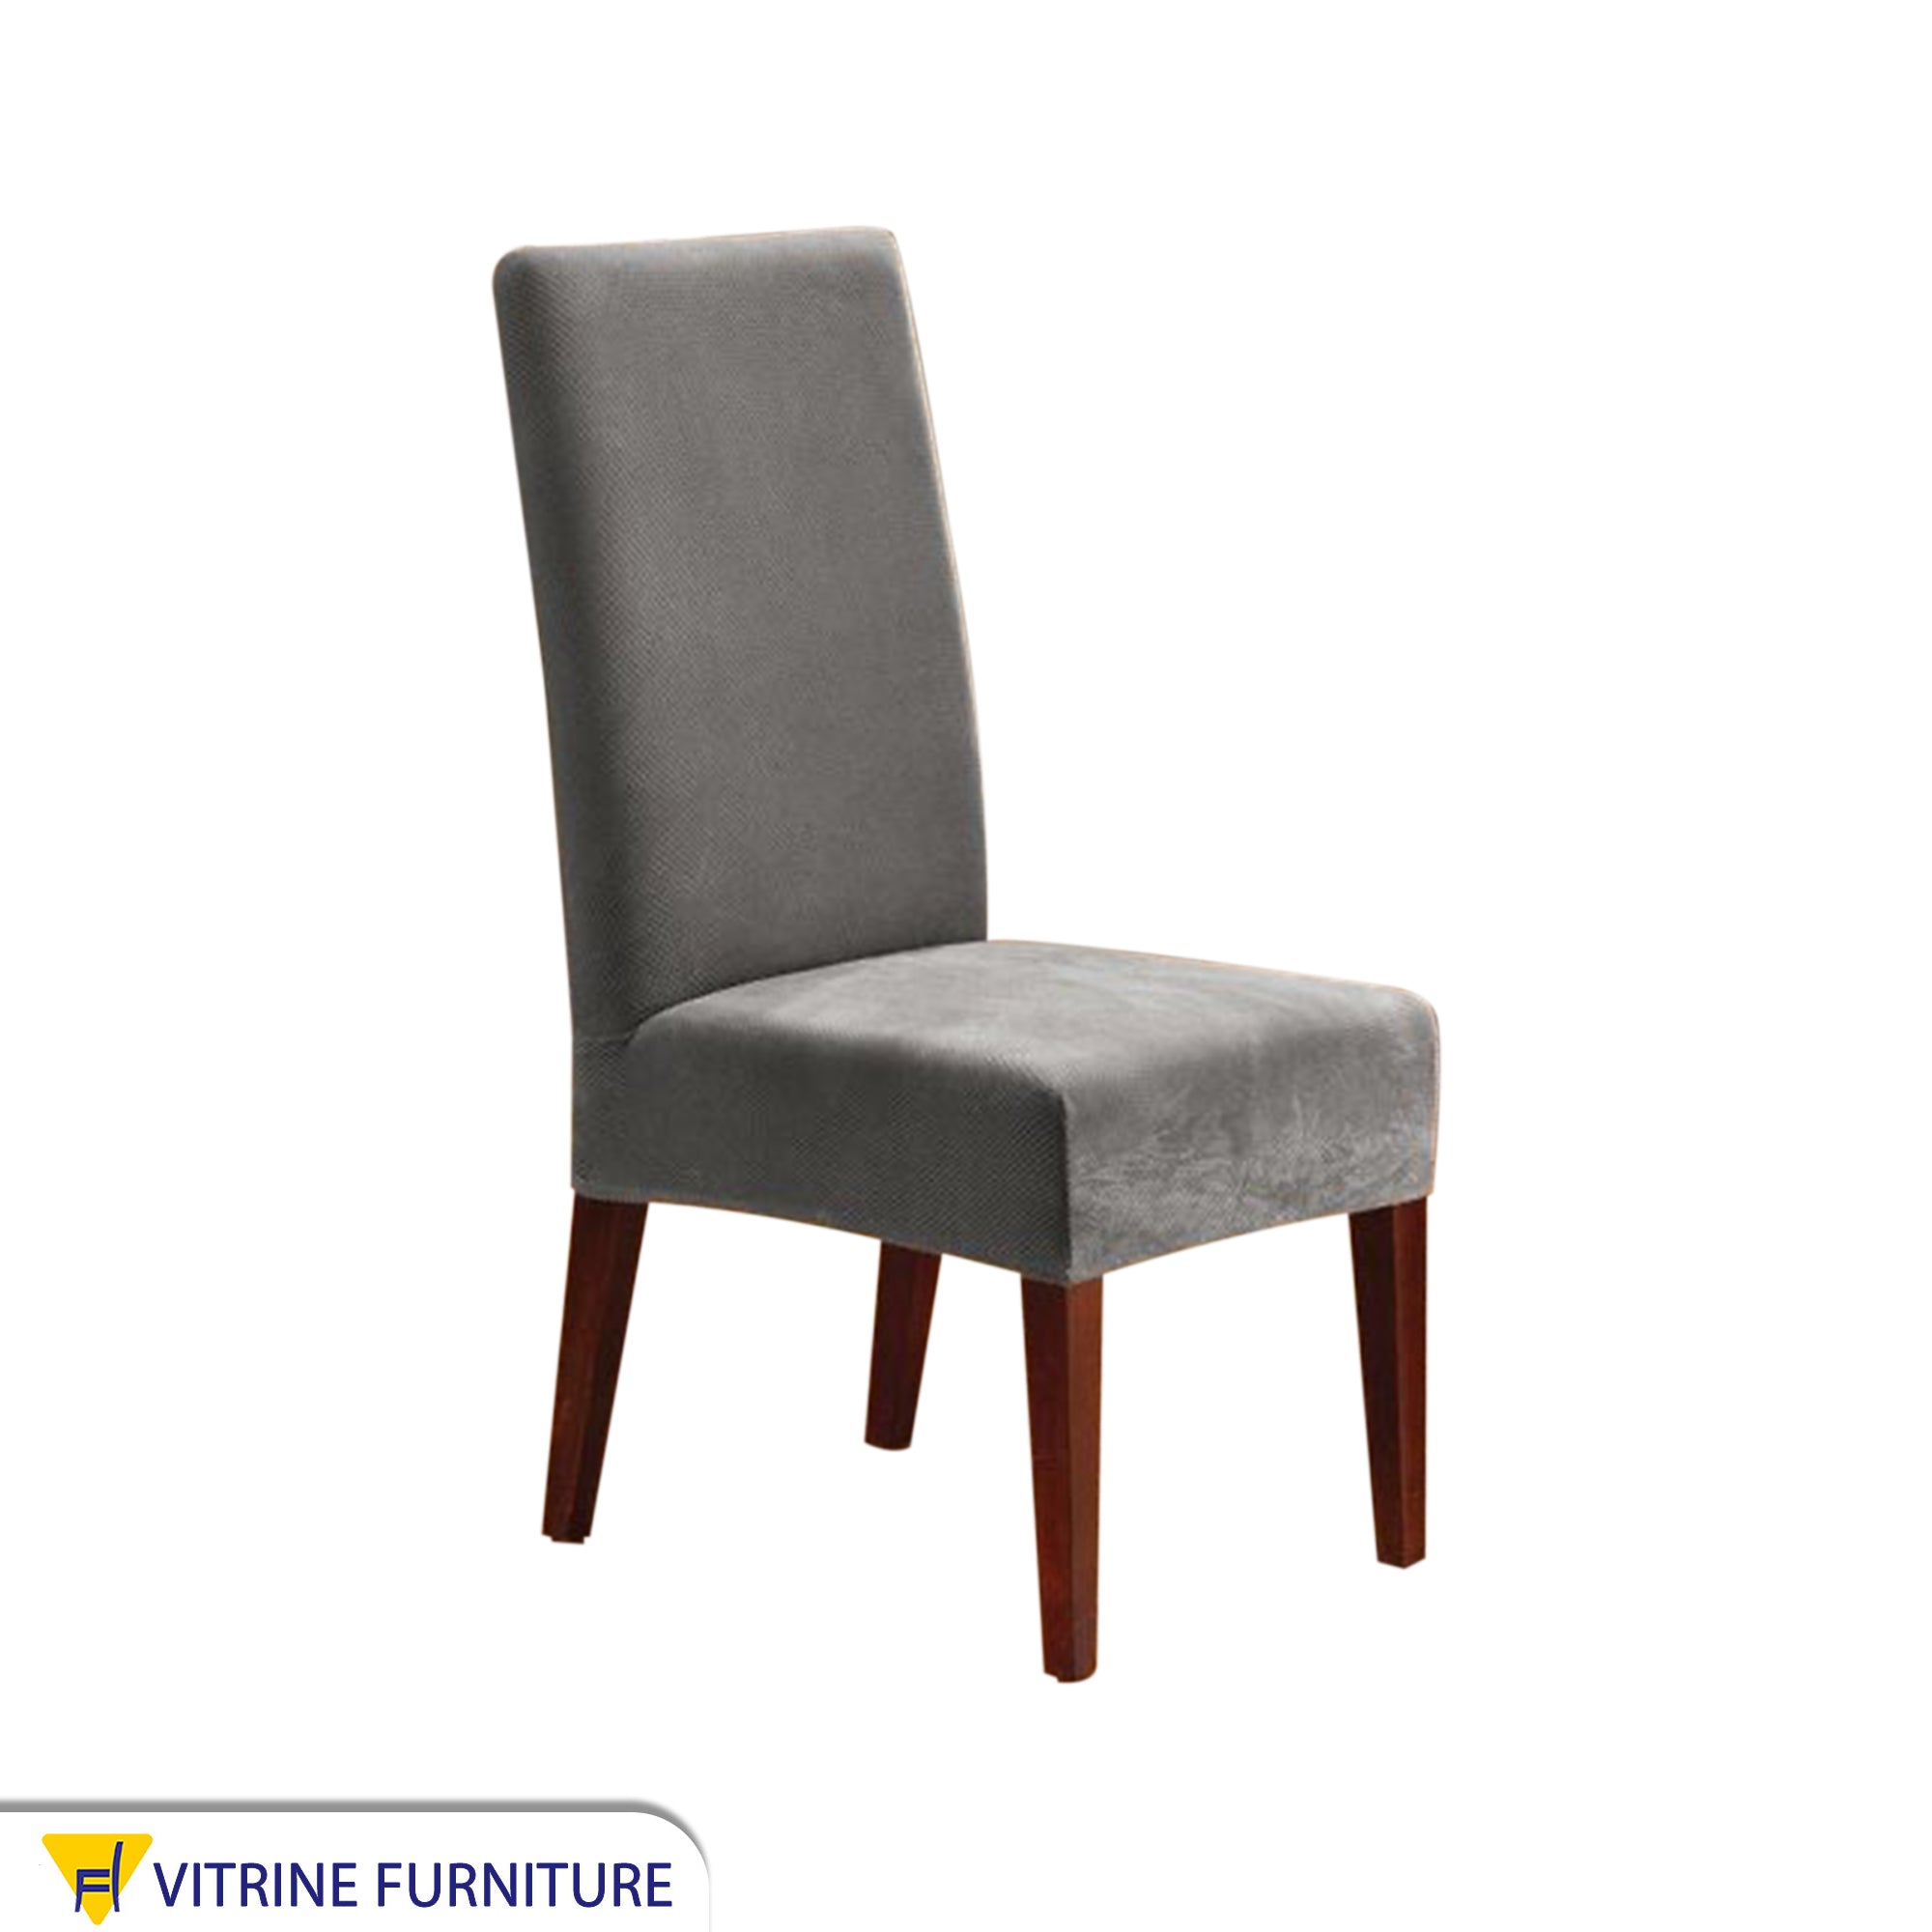 Upholstered chair with square base